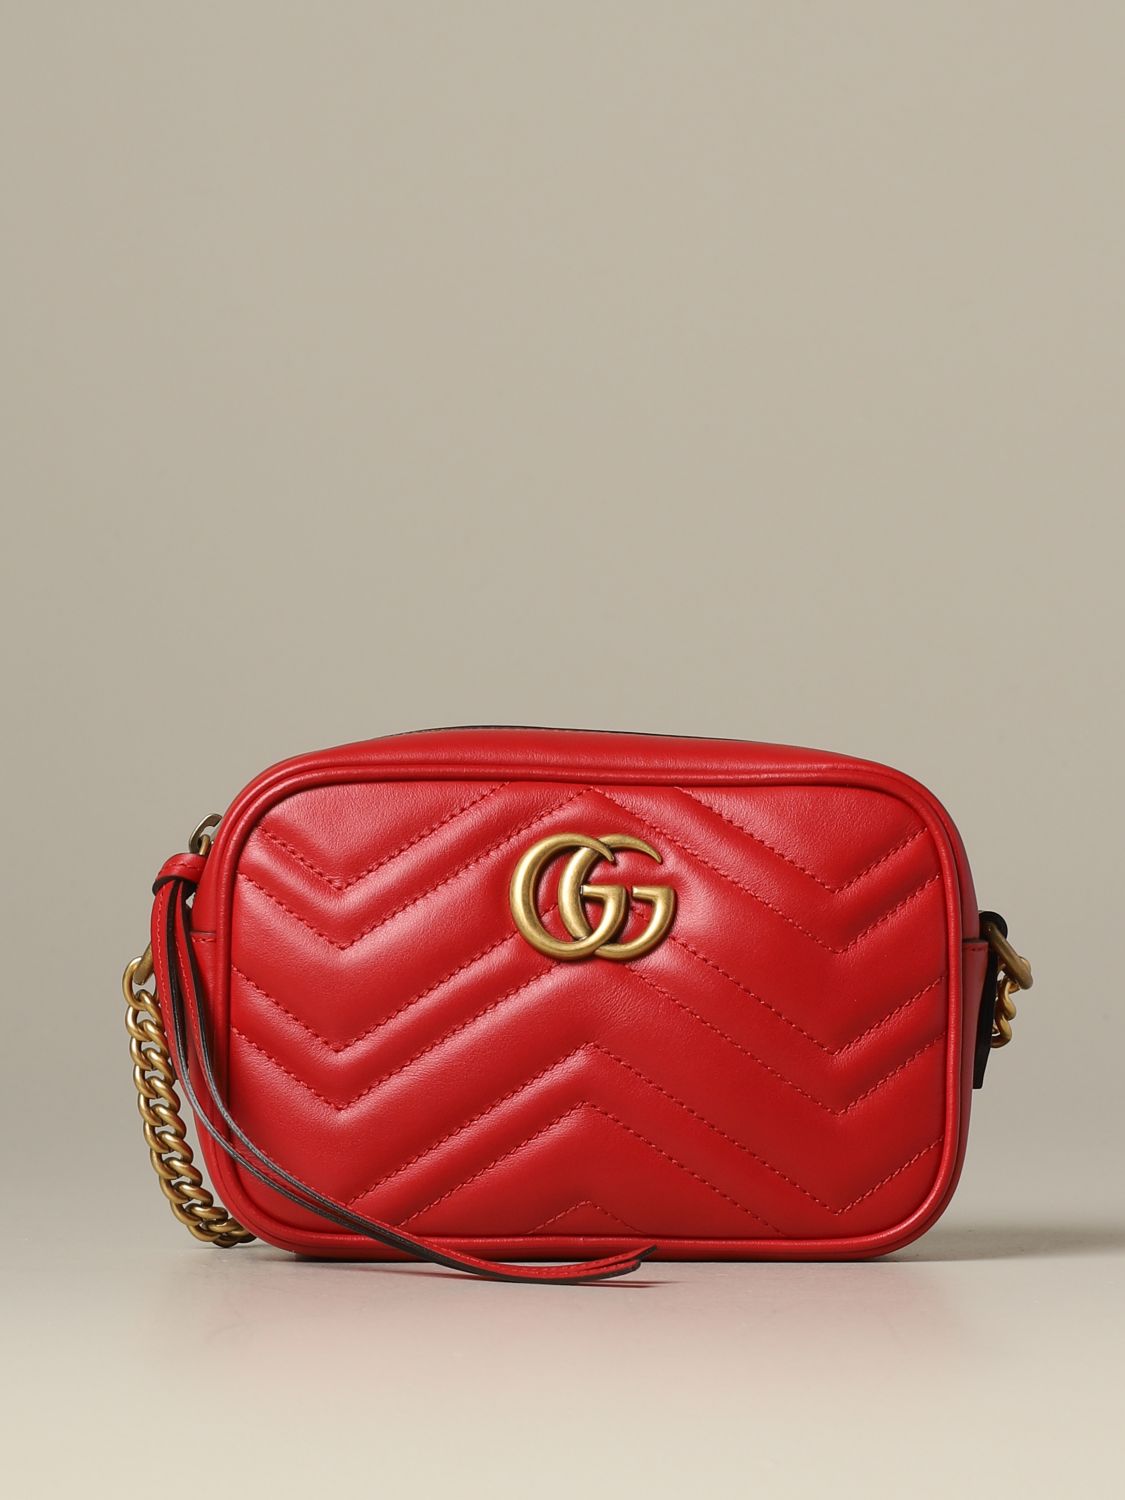 GUCCI: Marmont shoulder bag in quilted leather - Red | Gucci crossbody ...